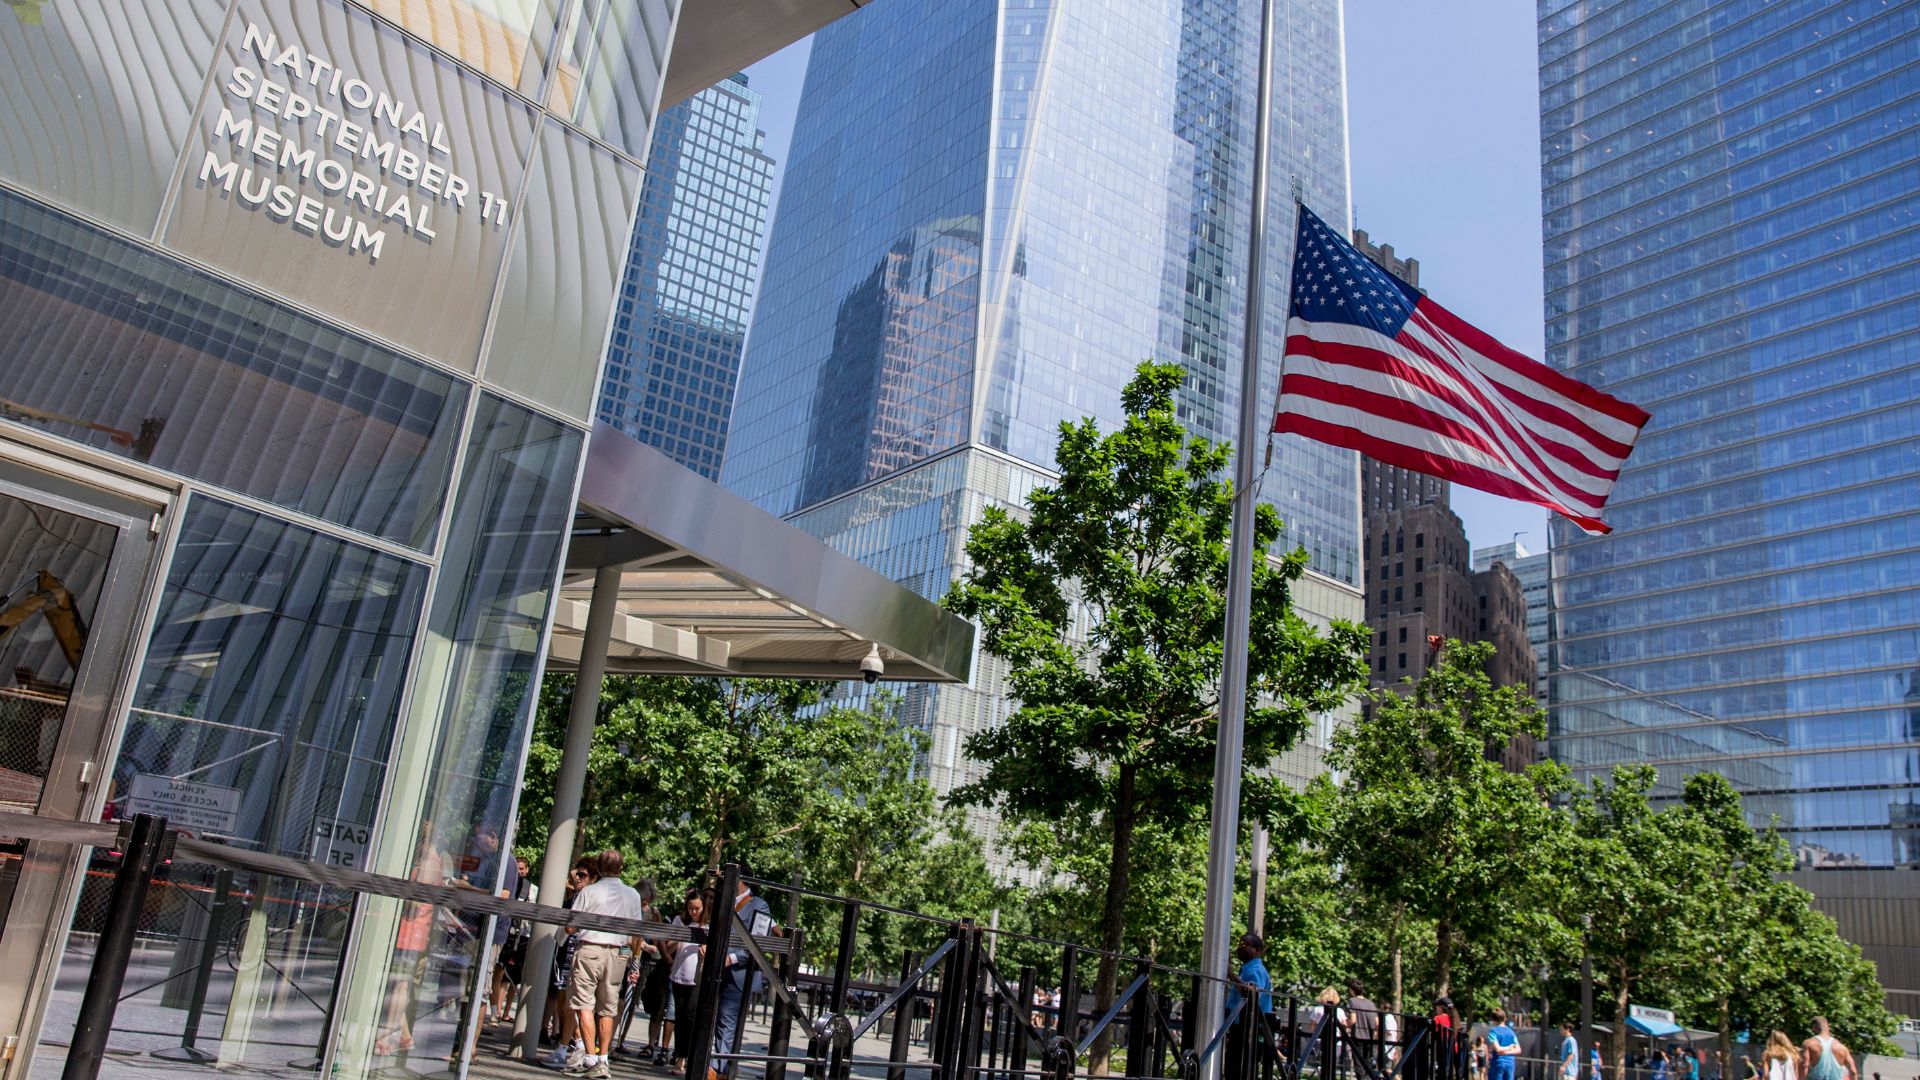 Entrance to the 9/11 Museum, with leafy green trees in the background and an American flag moving in a breeze